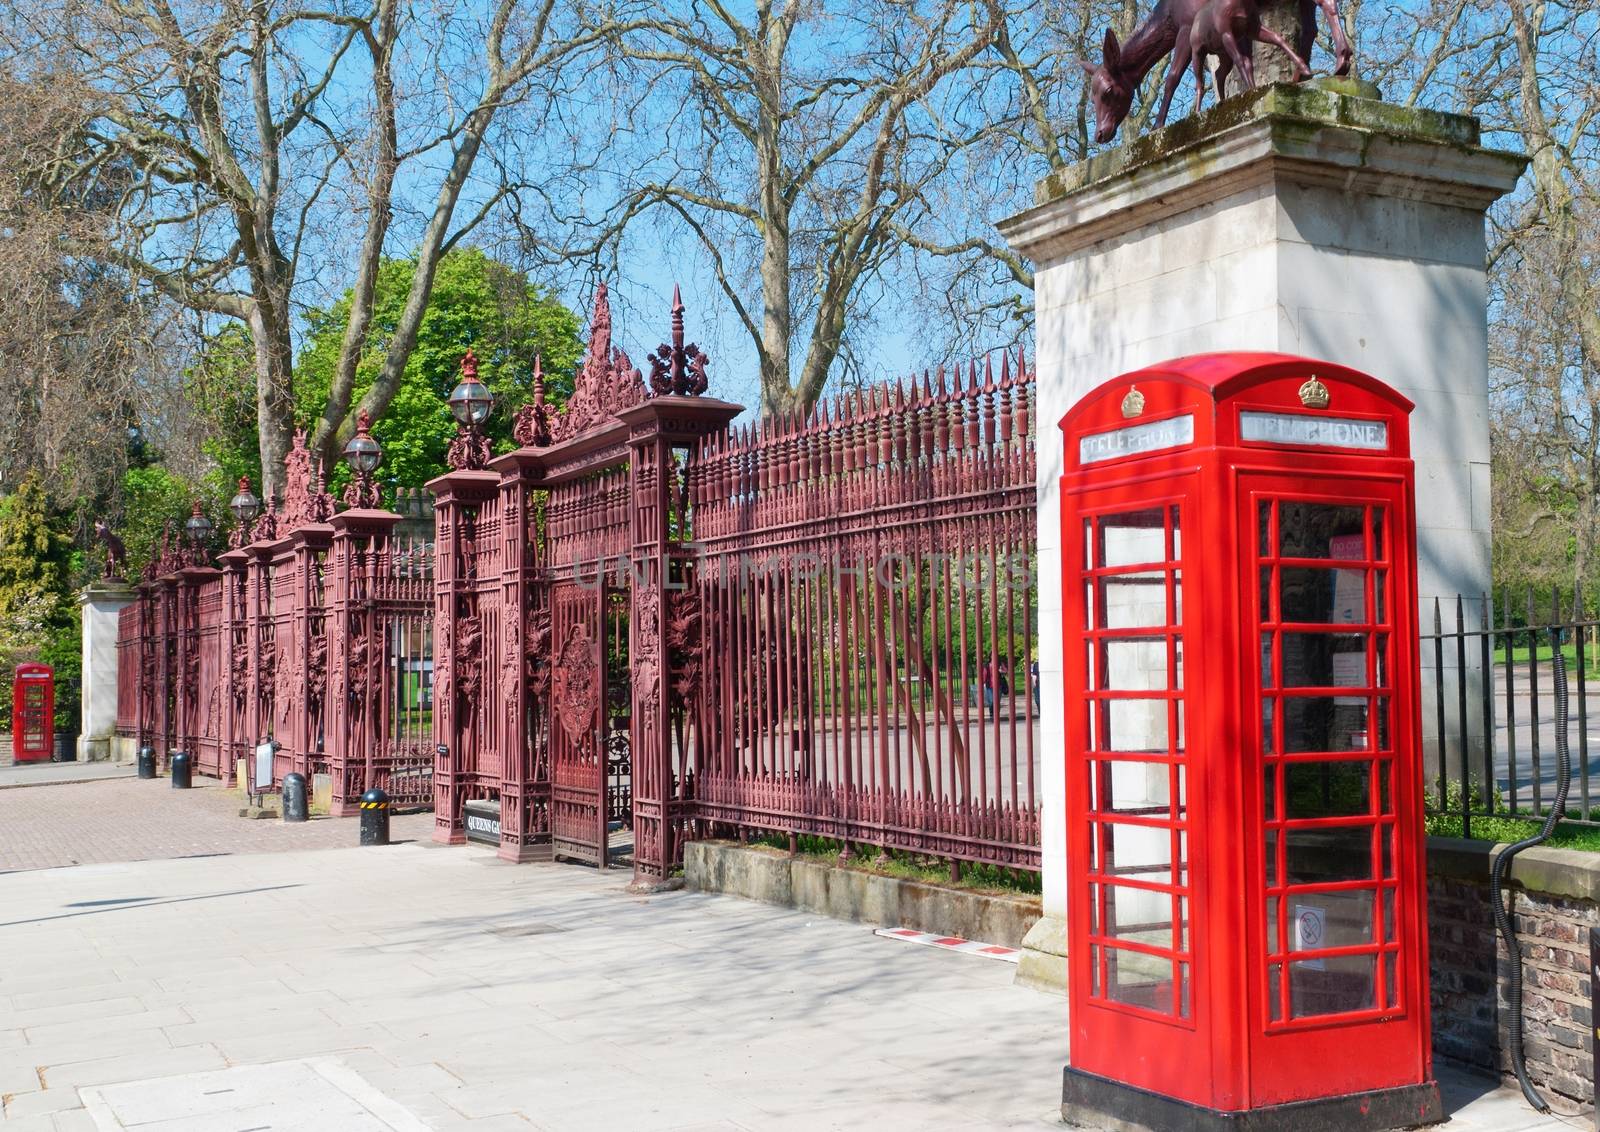 Typical London red phone cabins by mitakag